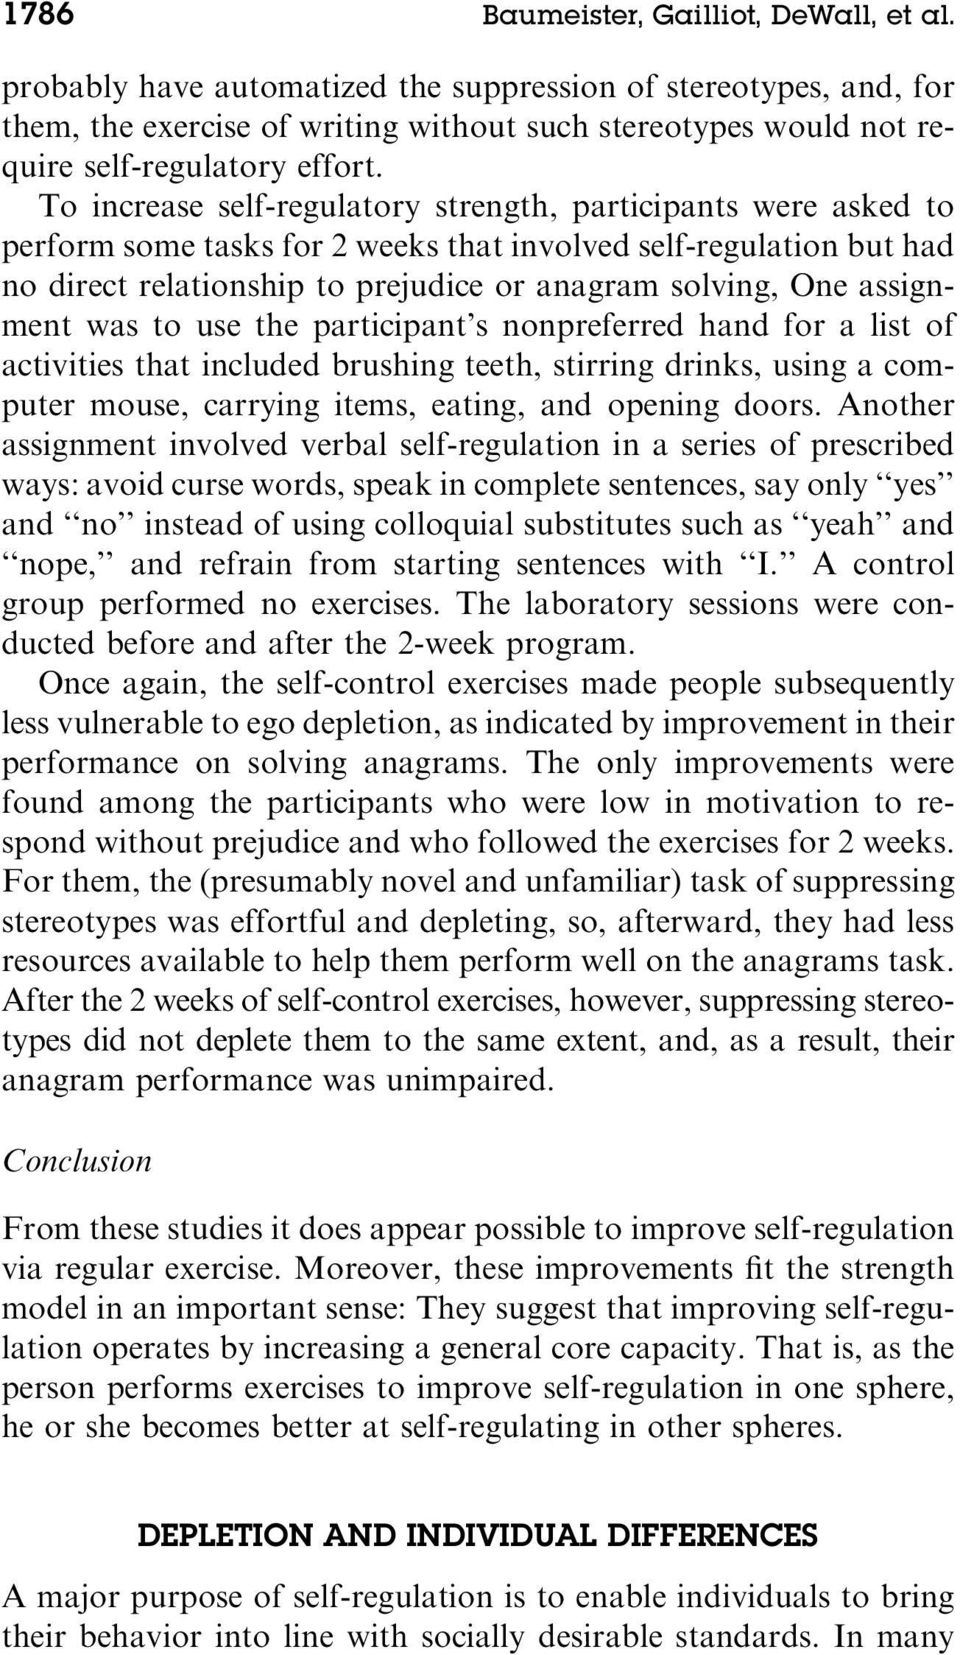 To increase self-regulatory strength, participants were asked to perform some tasks for 2 weeks that involved self-regulation but had no direct relationship to prejudice or anagram solving, One